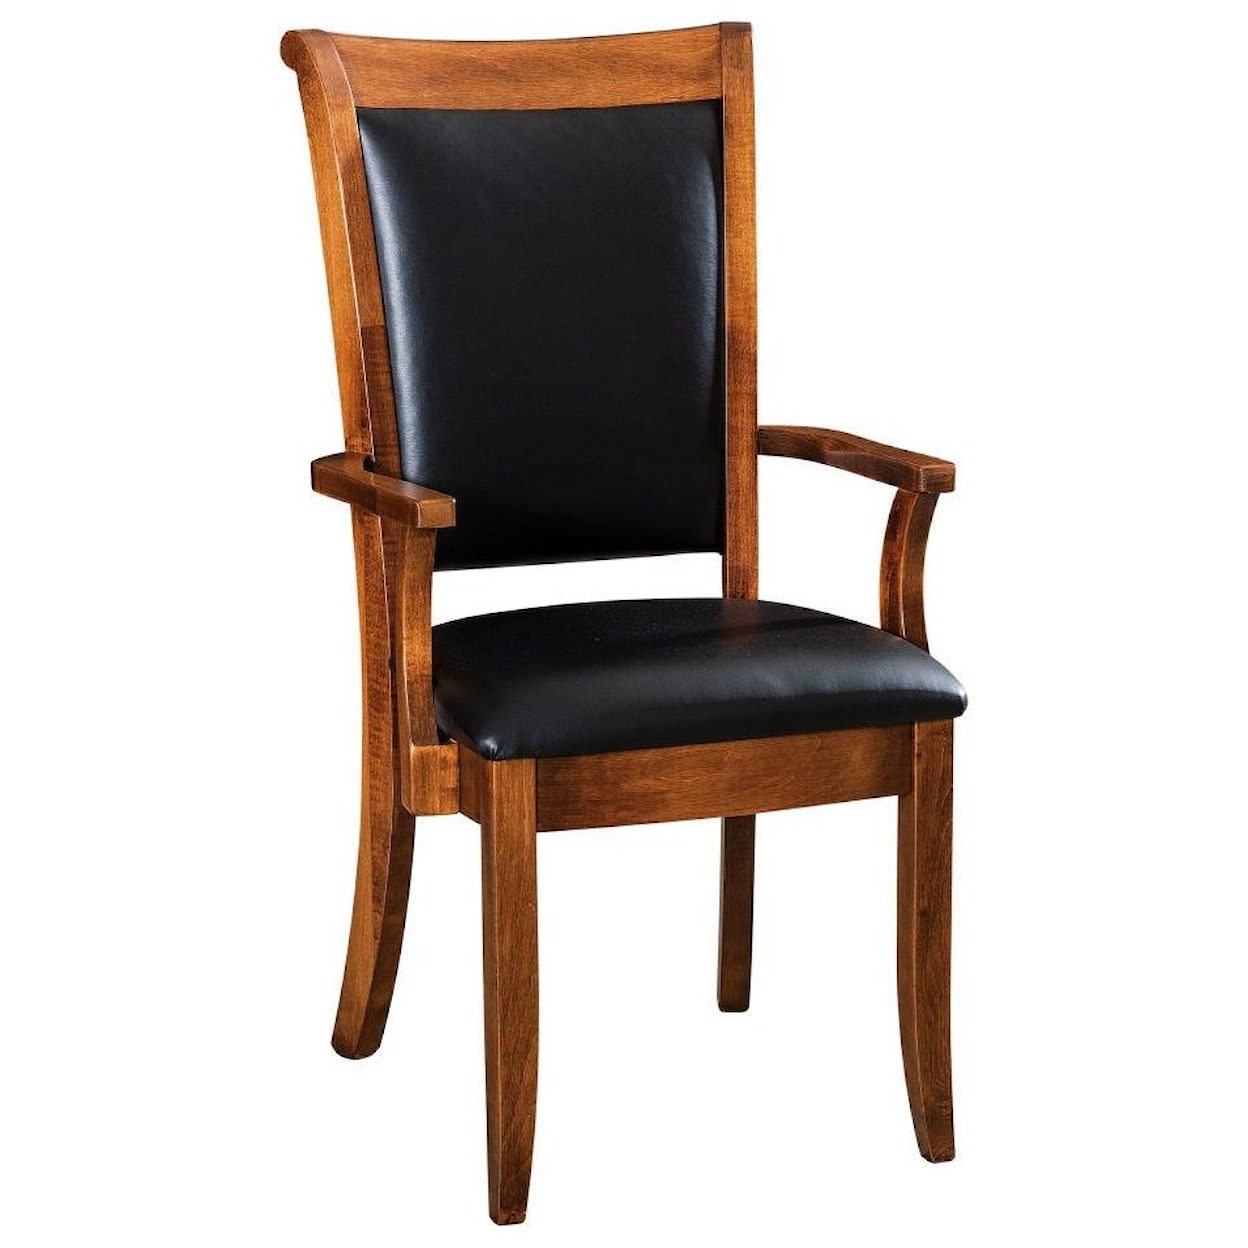 F&N Woodworking Kimberly Arm Chair